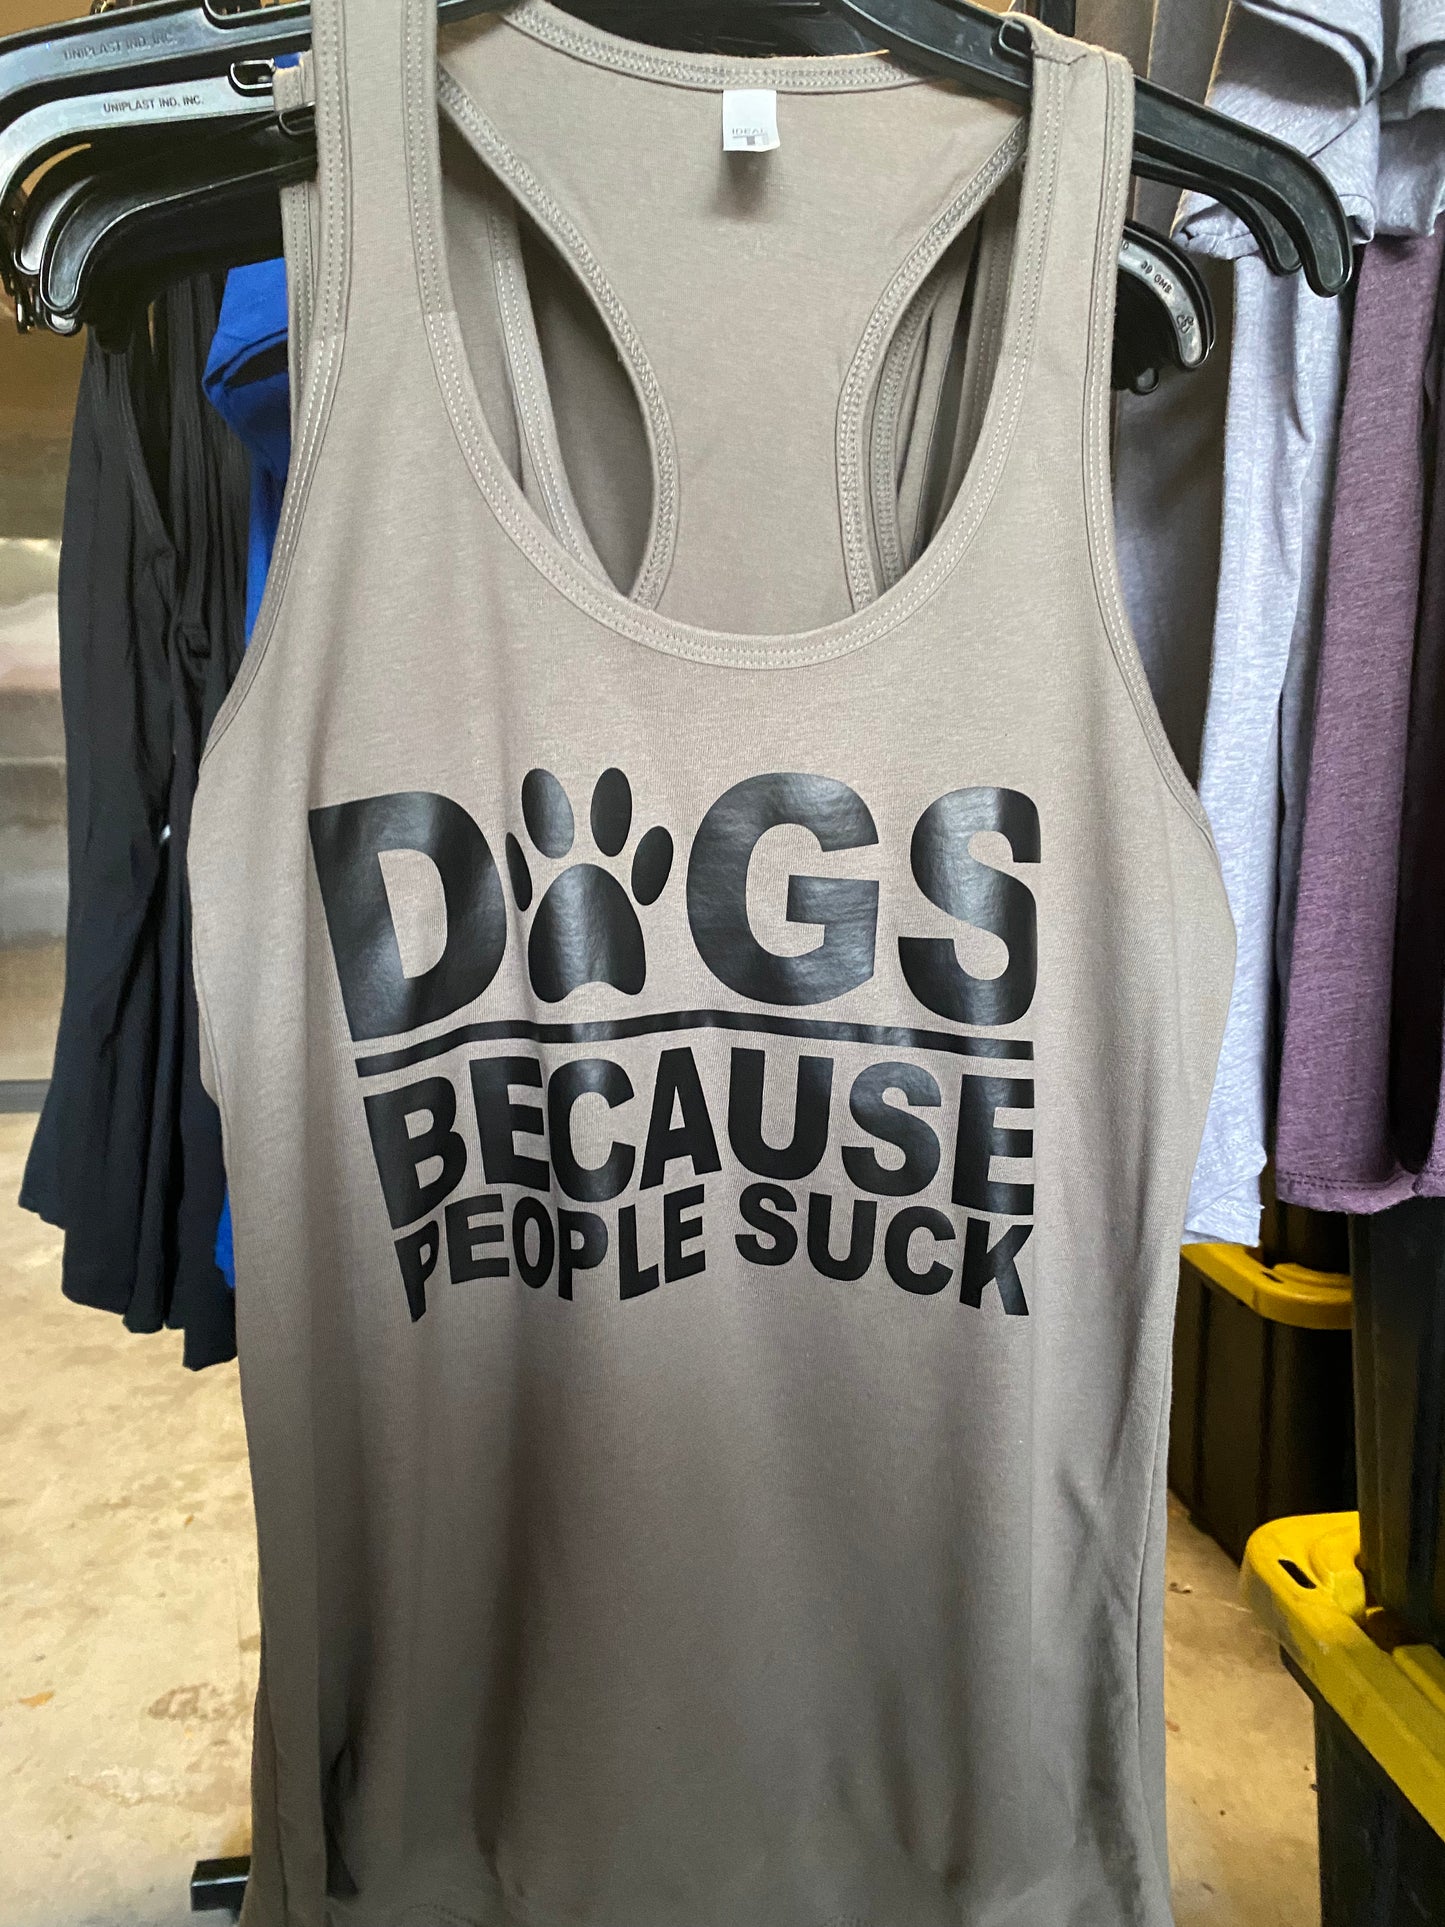 DOGS BECAUSE PEOPLE SUCK - Unleashed